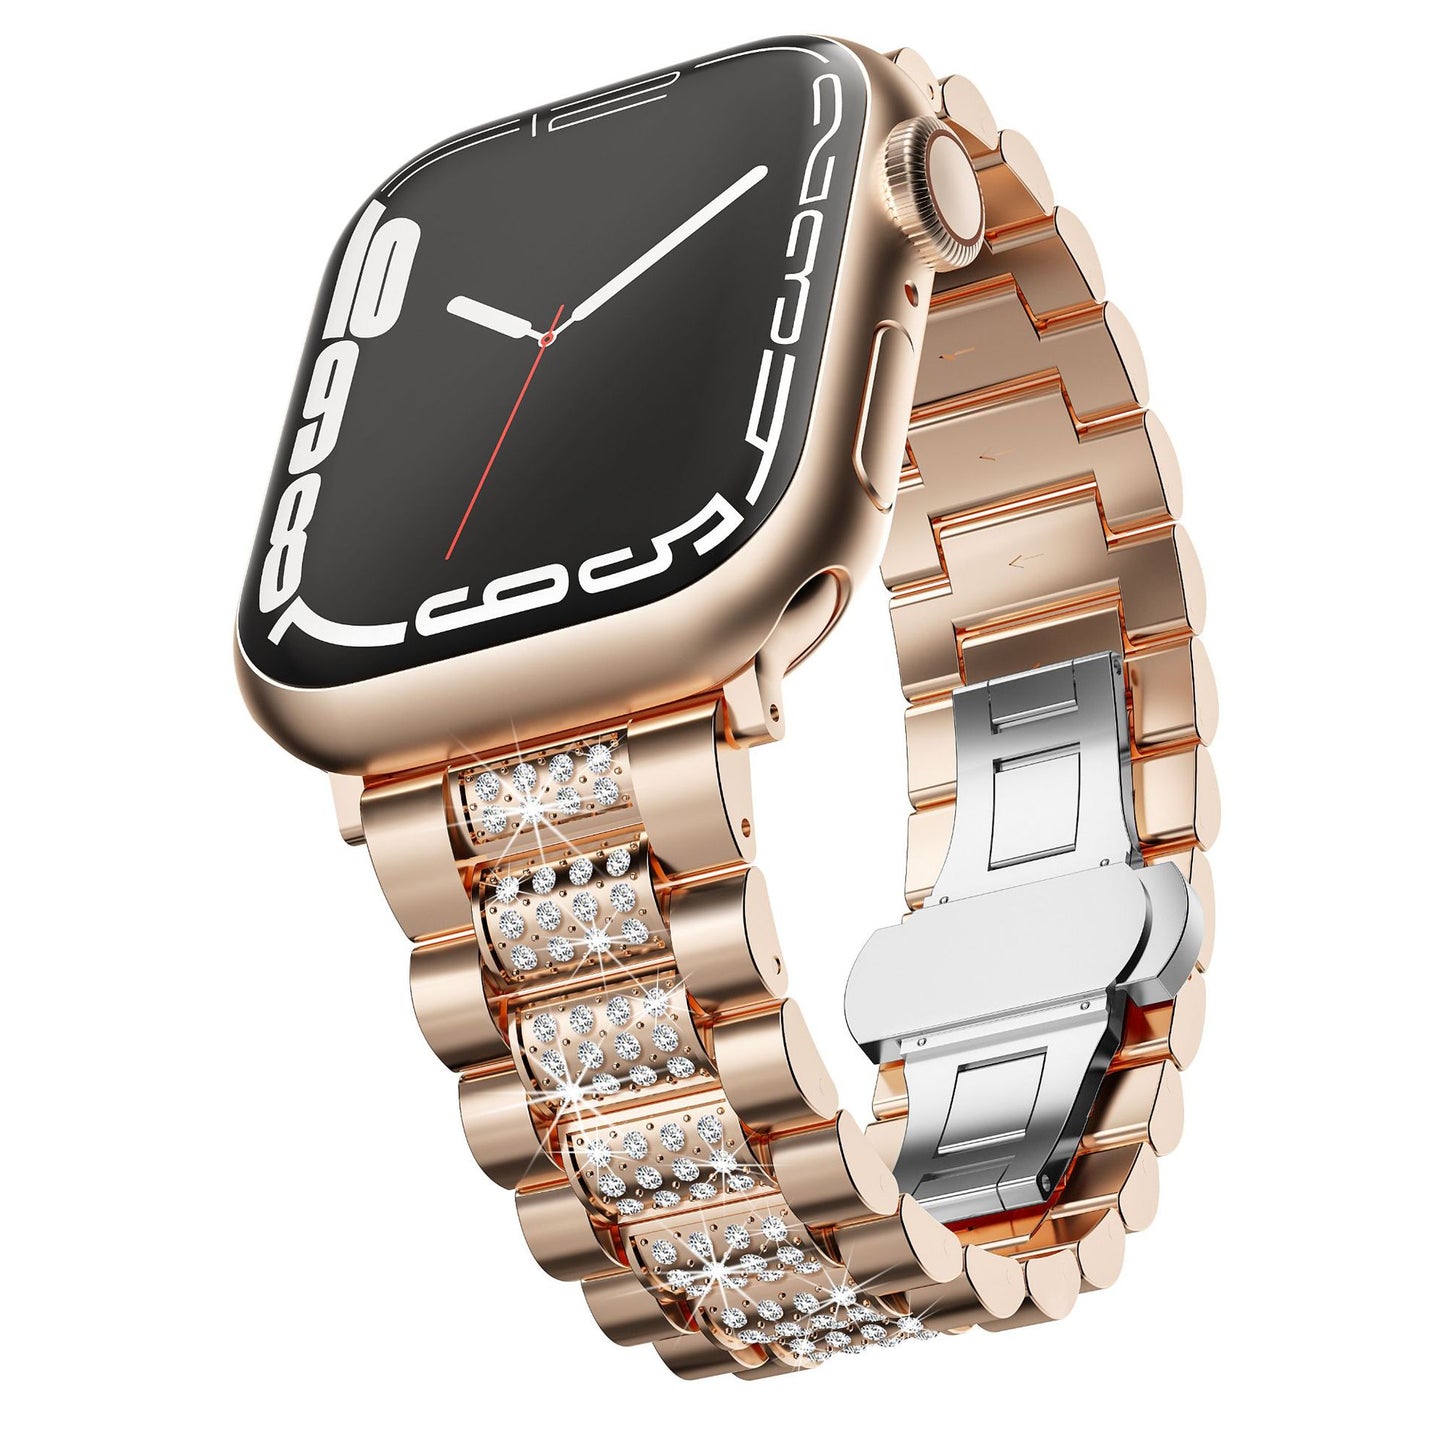 Suitable for high-end business steel strap with diamond inlaid metal strap on Apple watches